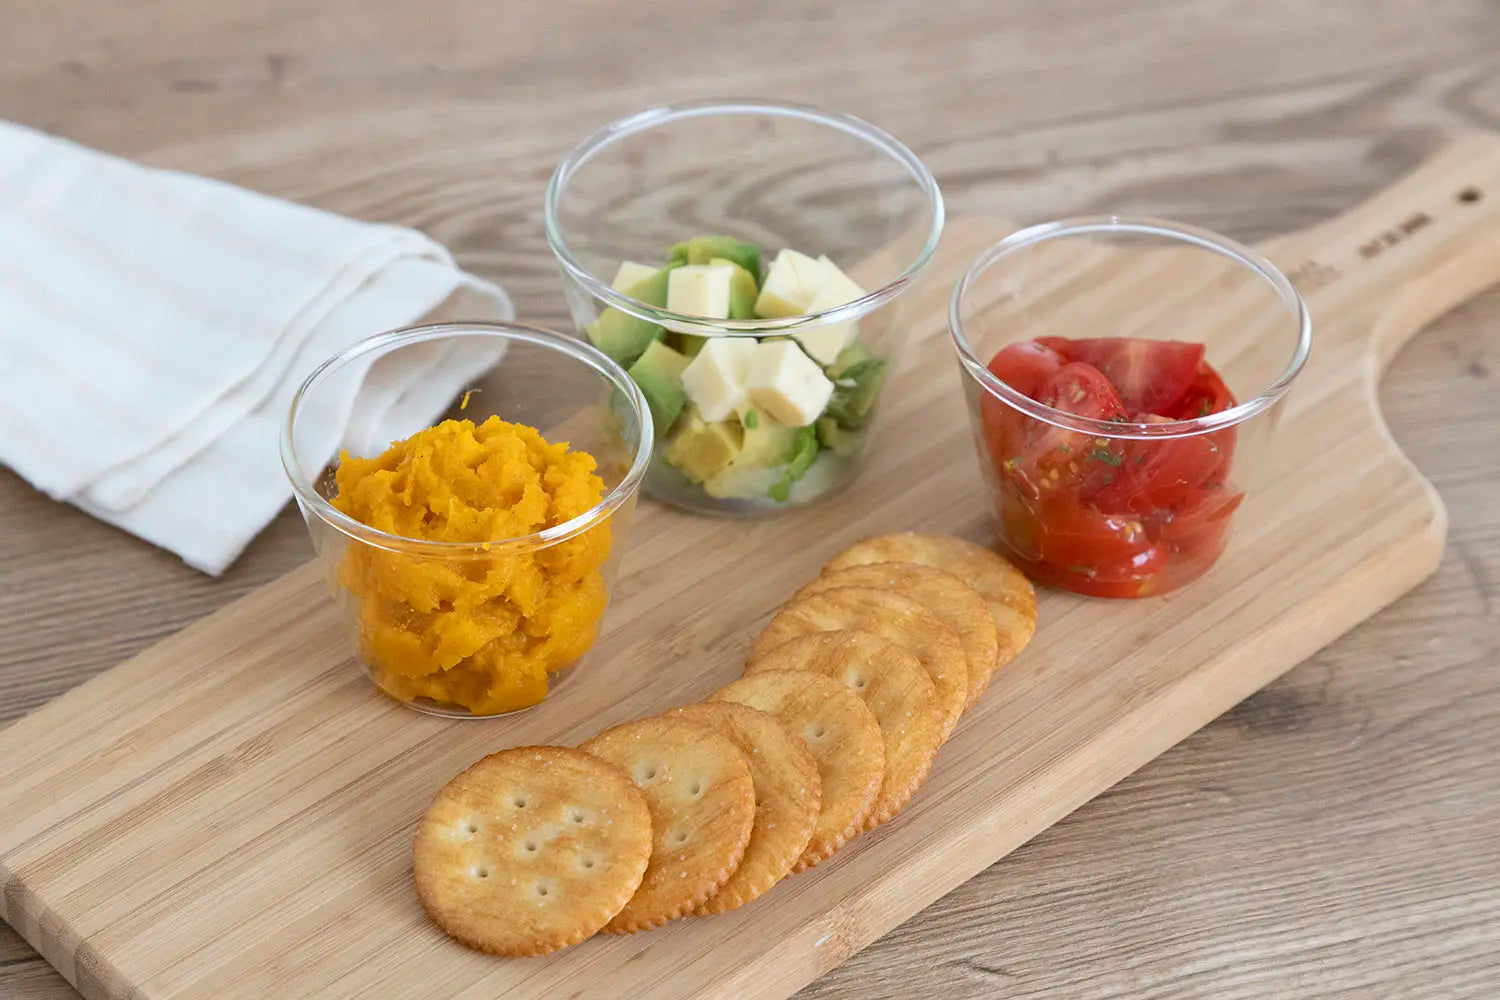 Snack ingredients in pudding cups with crackers